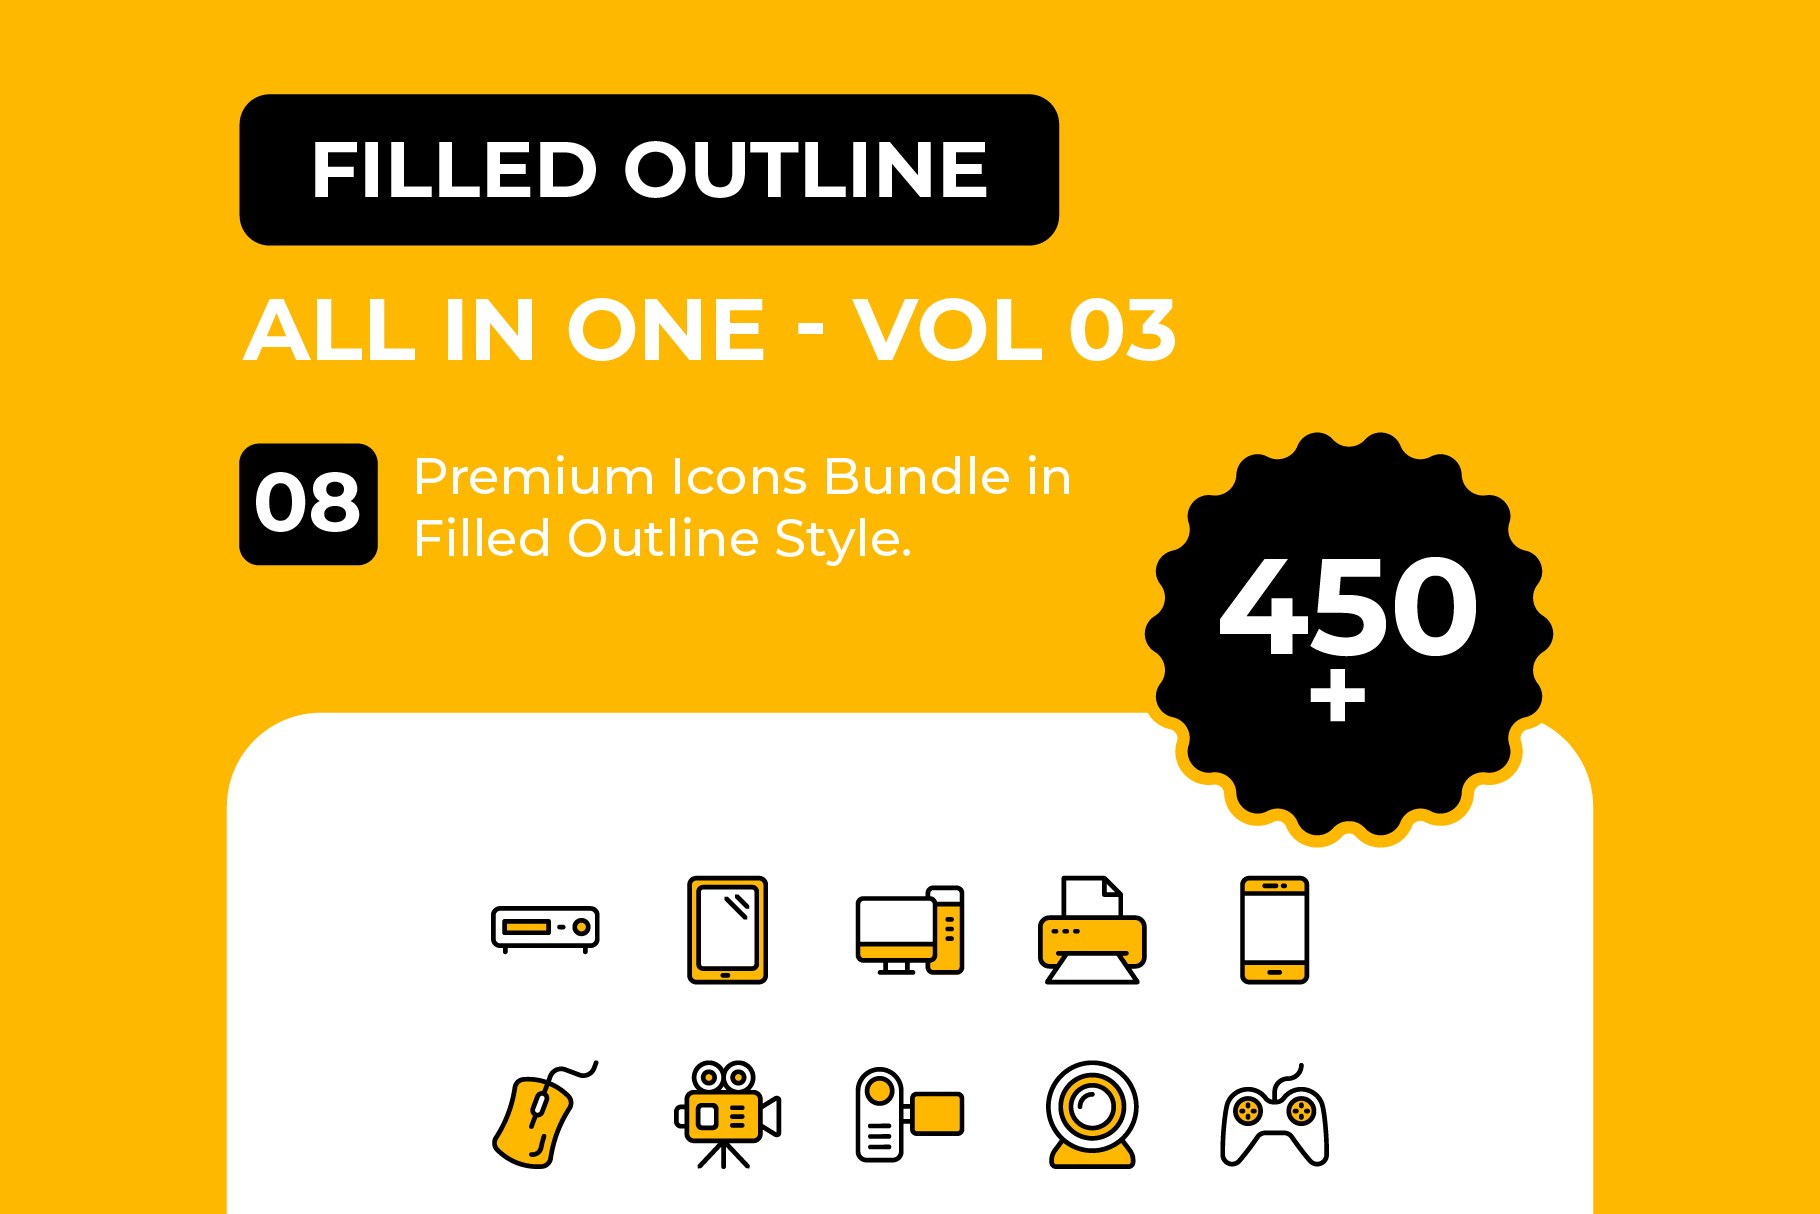 Filled Outline Icons Bundle cover image.